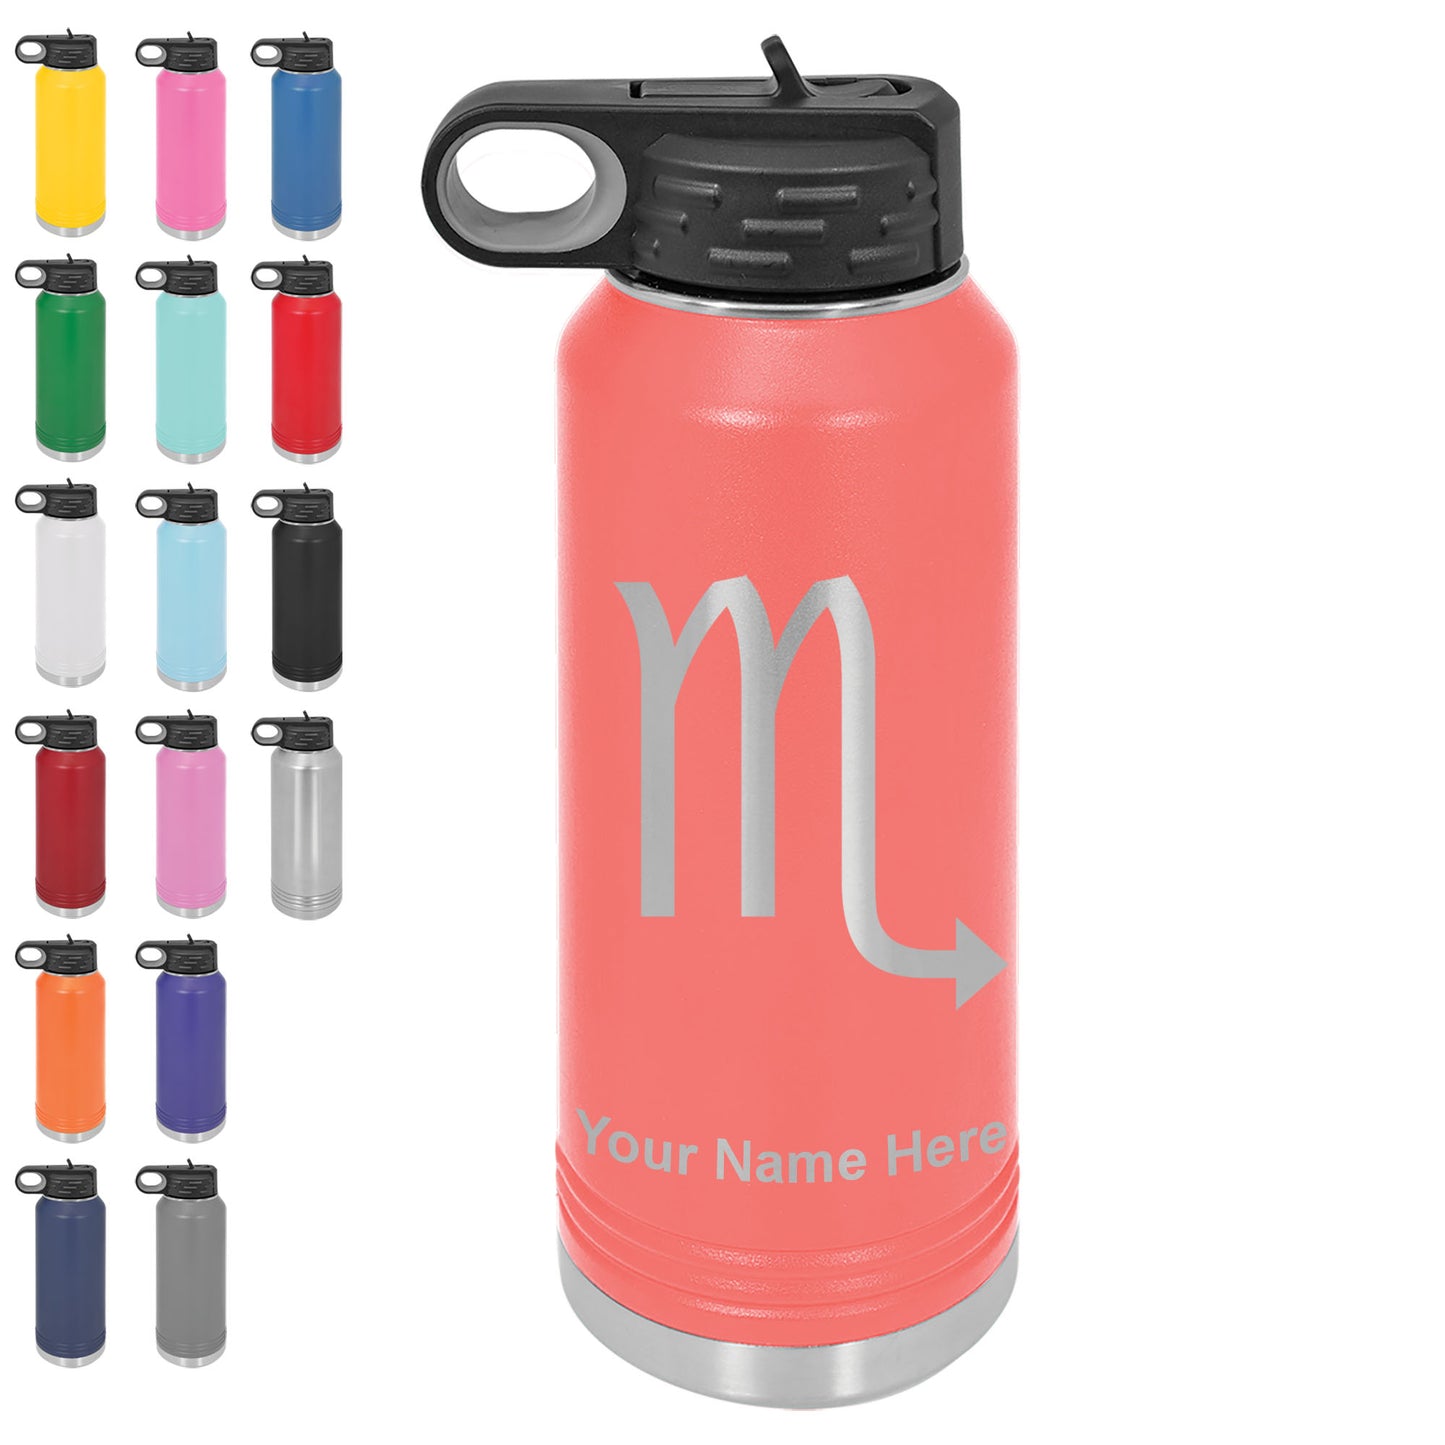 LaserGram 32oz Double Wall Flip Top Water Bottle with Straw, Zodiac Sign Scorpio, Personalized Engraving Included